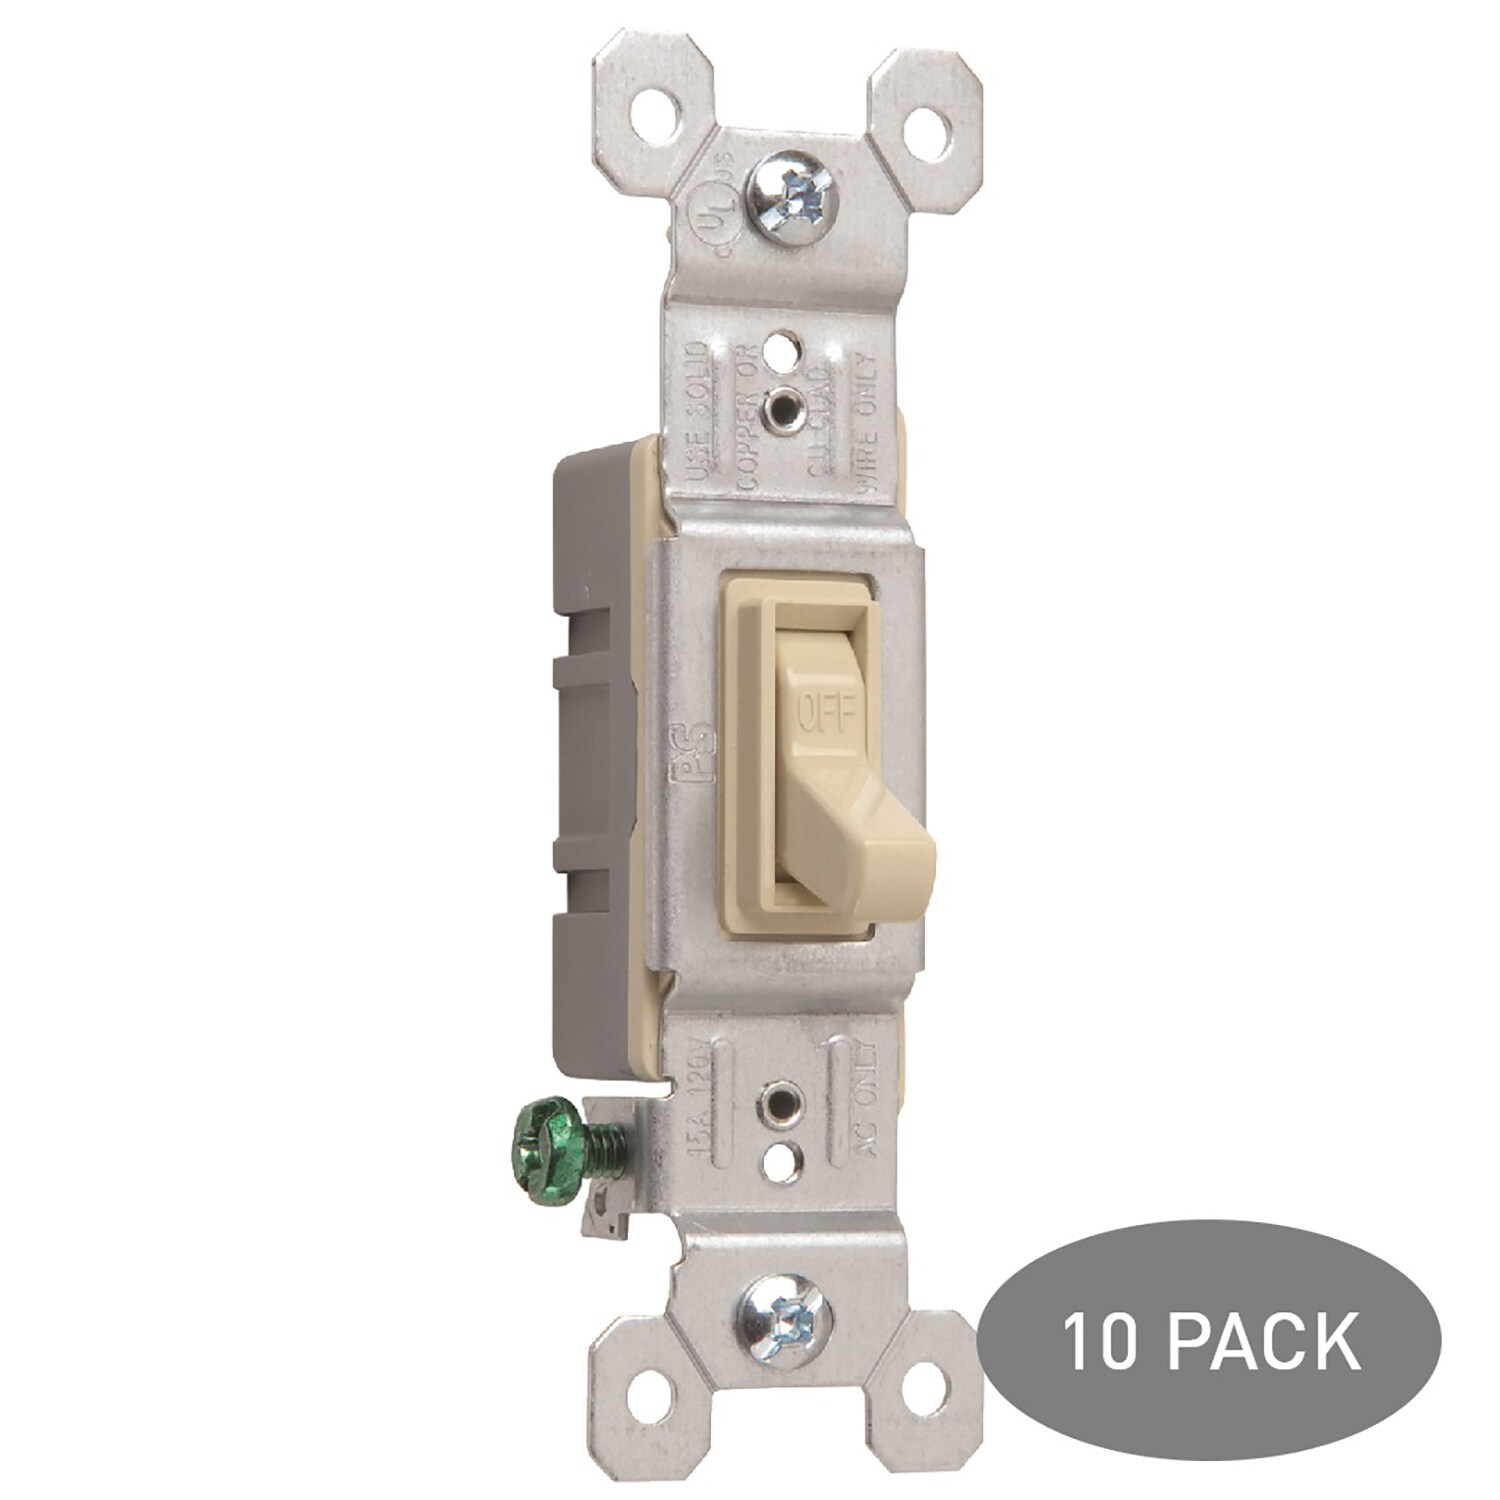 3-PK PASS & SEYMOUR 15AC3-I Ivory 15A COMMERCIAL NEW Toggle Light Switch 3-WAY 